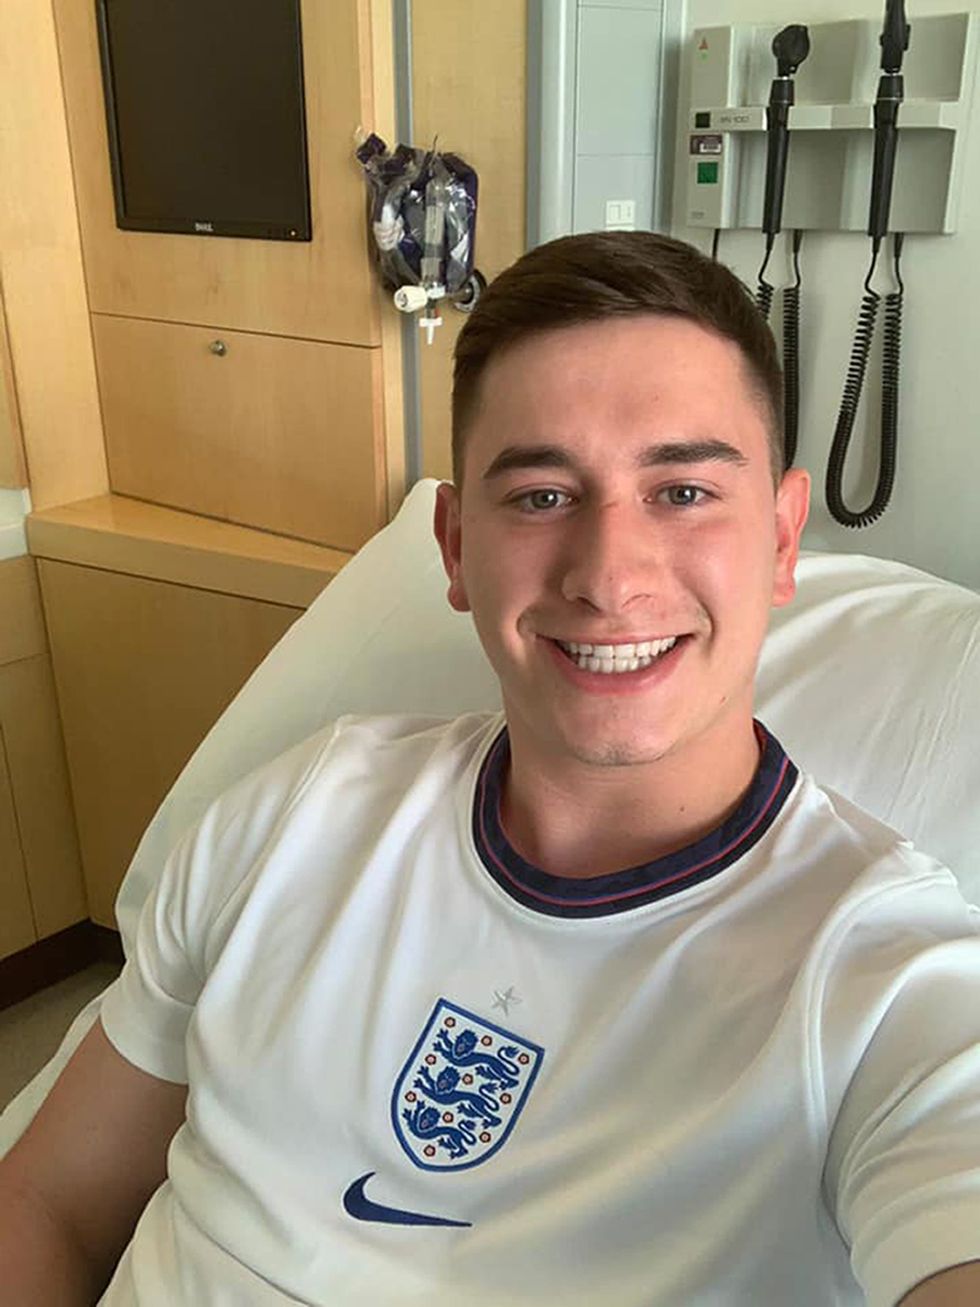 Football fan Sam Astley skipped the chance to go to England's Euro 2020 semi-final win because he was donating stem cells, is now set to be at Wembley for the final after he was offered free tickets